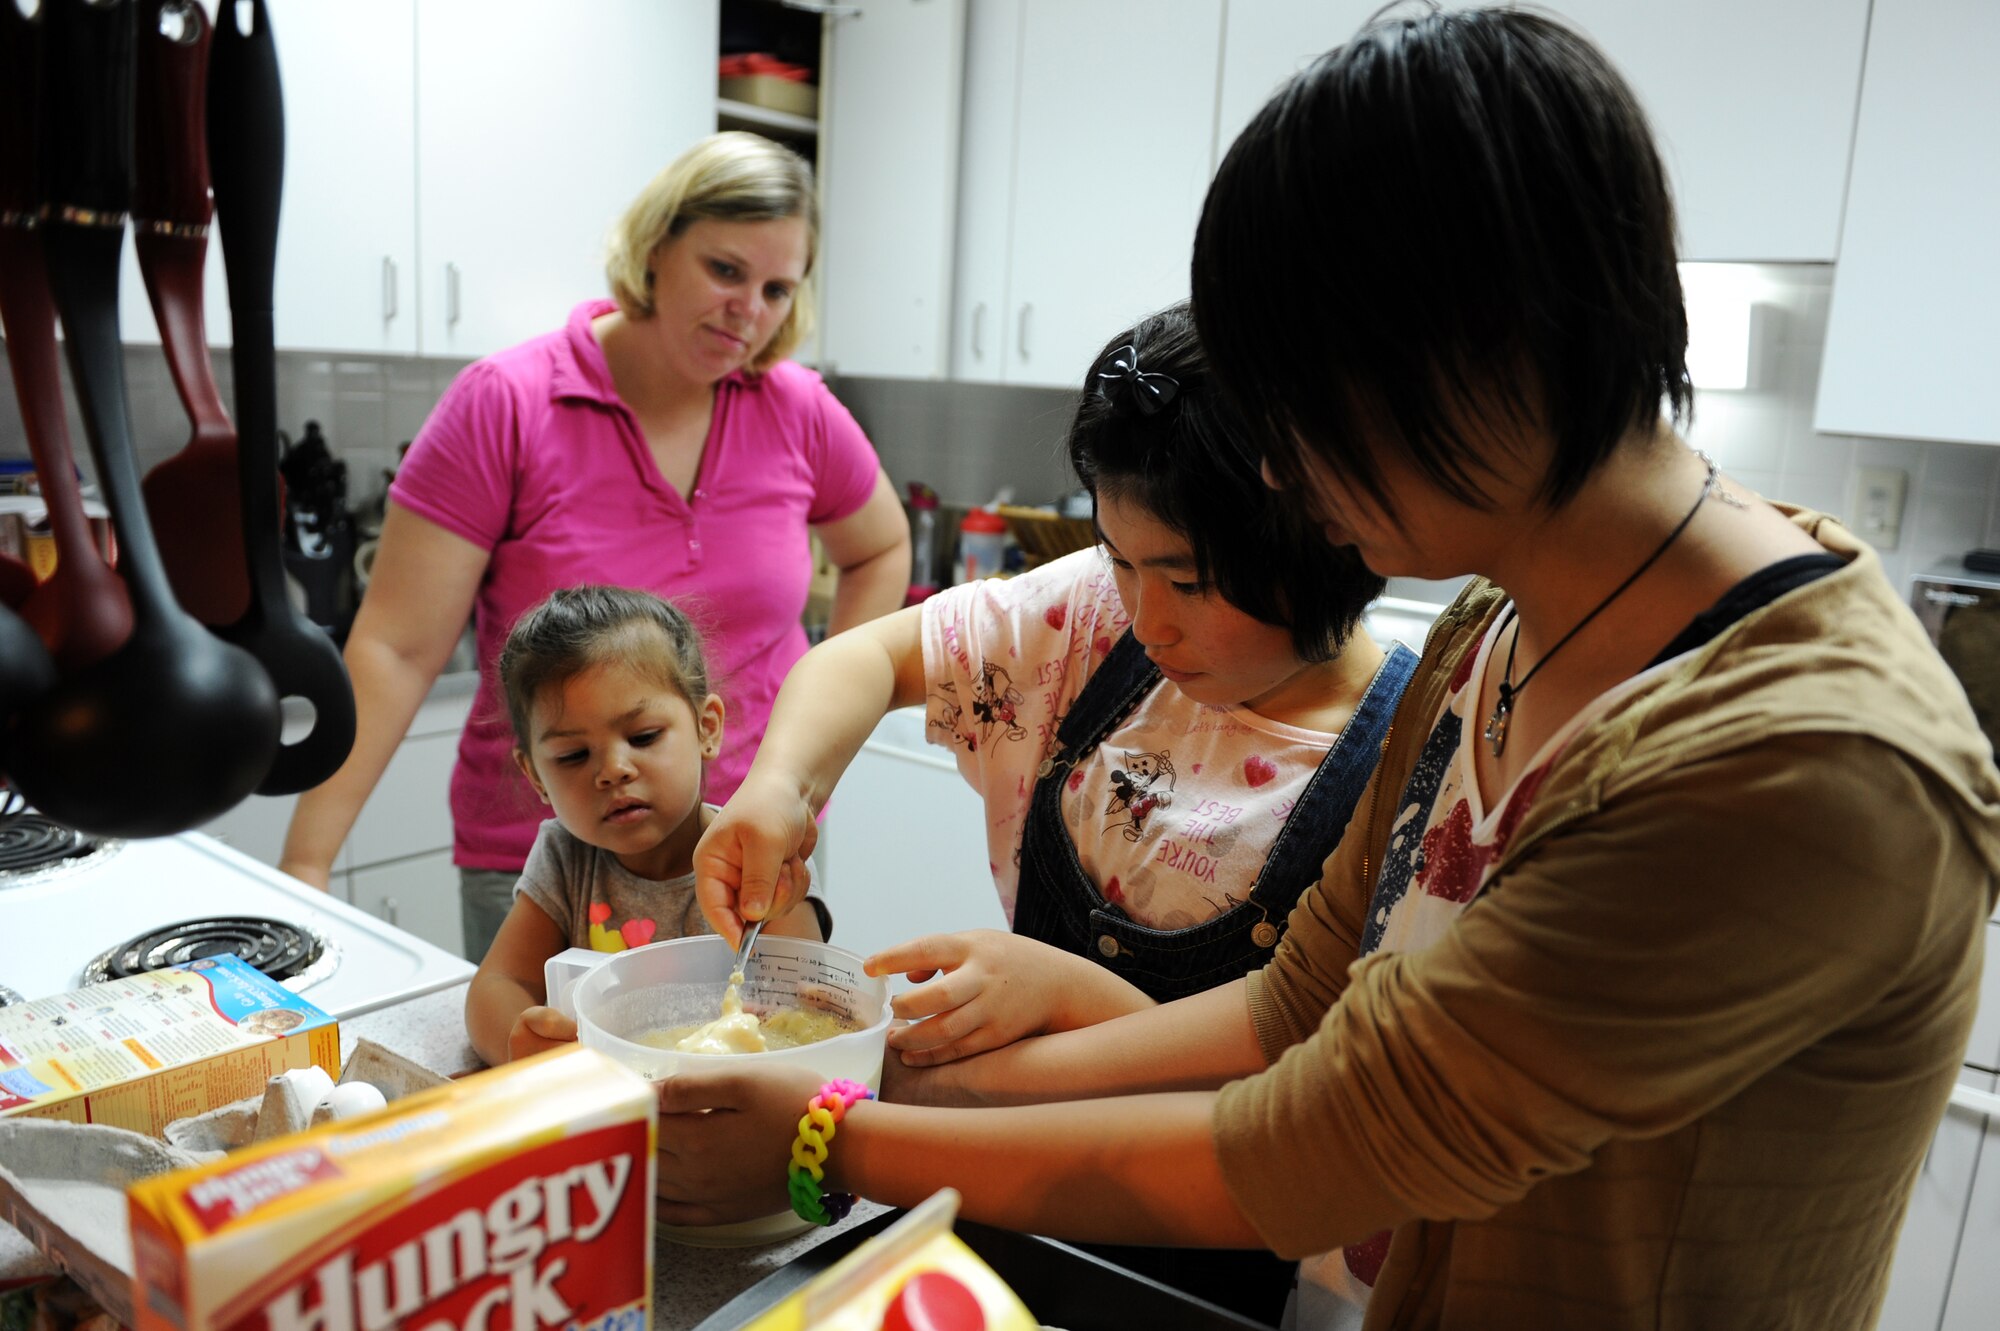 From left: U.S. Air Force Tech. Sgt. Marie Brown, 35th Fighter Wing Public Affairs NCO in charge of U.S. media relations, her daughter, Amane Nakamura and Nanase Abe, students from Tanohata Junior High School, cook breakfast together during a weekend Homestay event at Misawa Air Base, Japan, Aug. 4, 2013. Along with showing continued national support following the earthquake and tsunami disaster in 2011, the Homestay program, sponsored by the Misawa International Club, allows local national students to experience American culture with a weekend stay with families at Misawa Air Base. (U.S. Air Force photo by Senior Airman Kia Atkins)